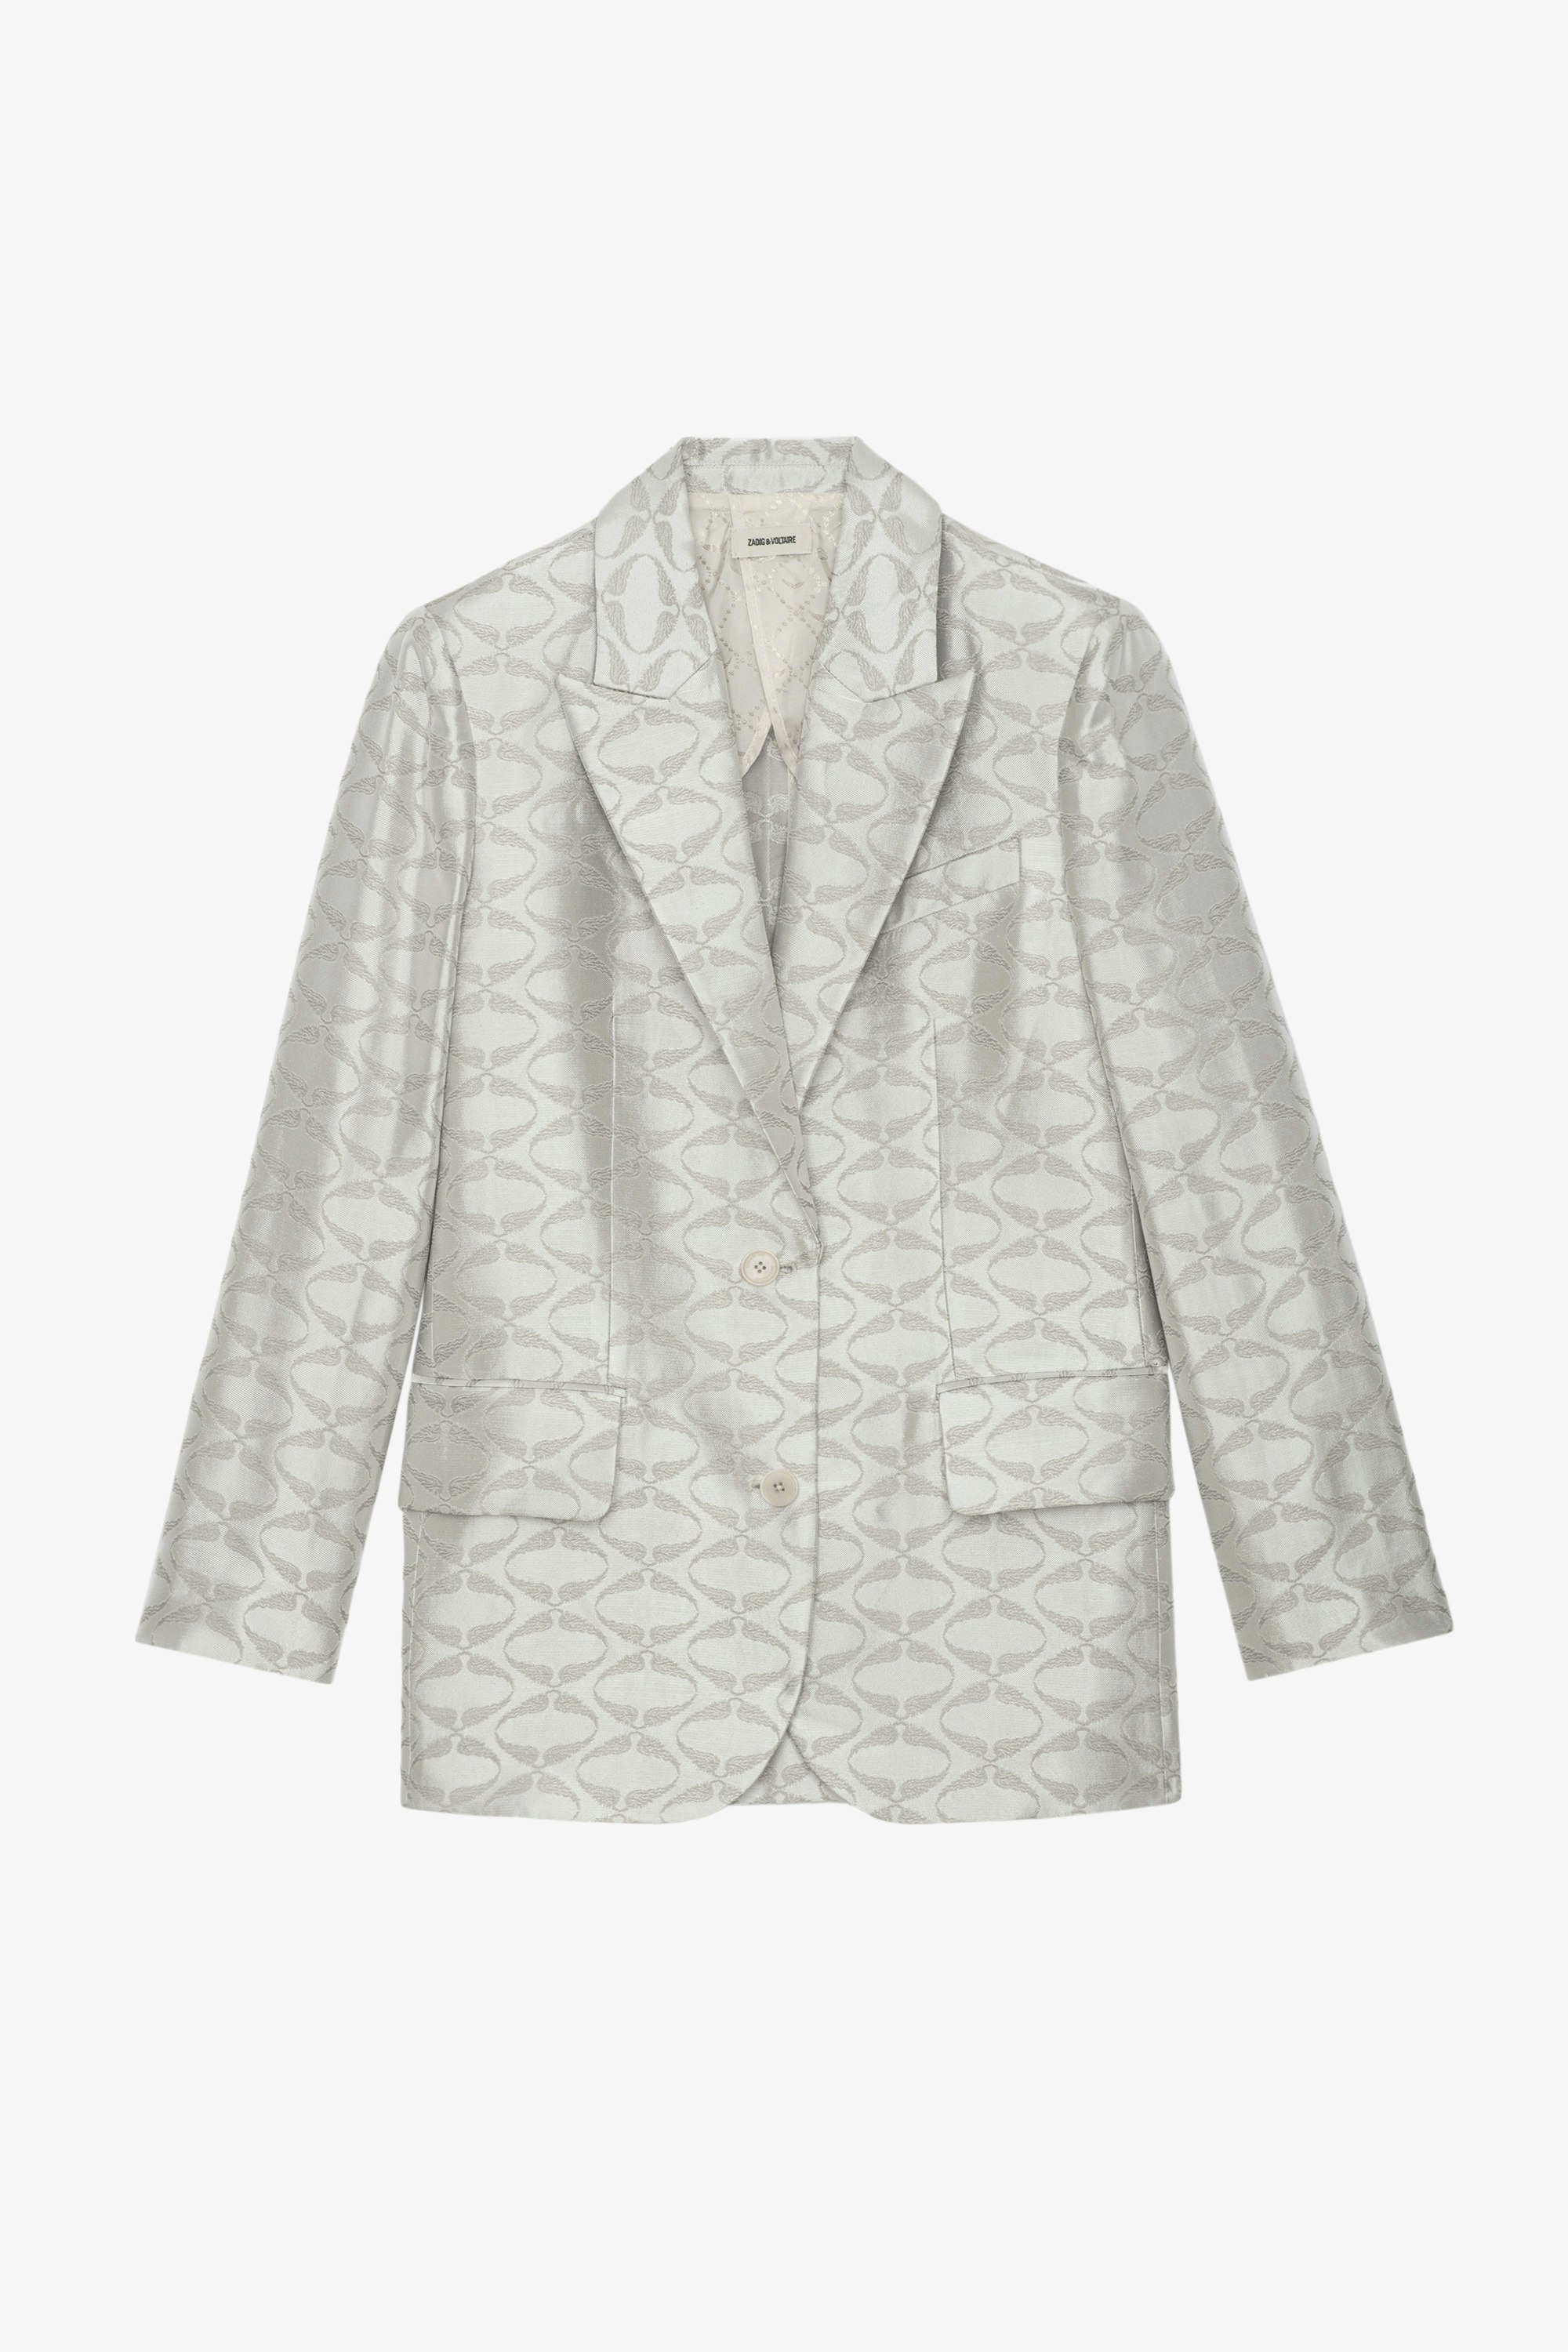 Vicka Wings Jacquard Blazer - Grey tailored jacket with tailored collar, button closure and jacquard wings.